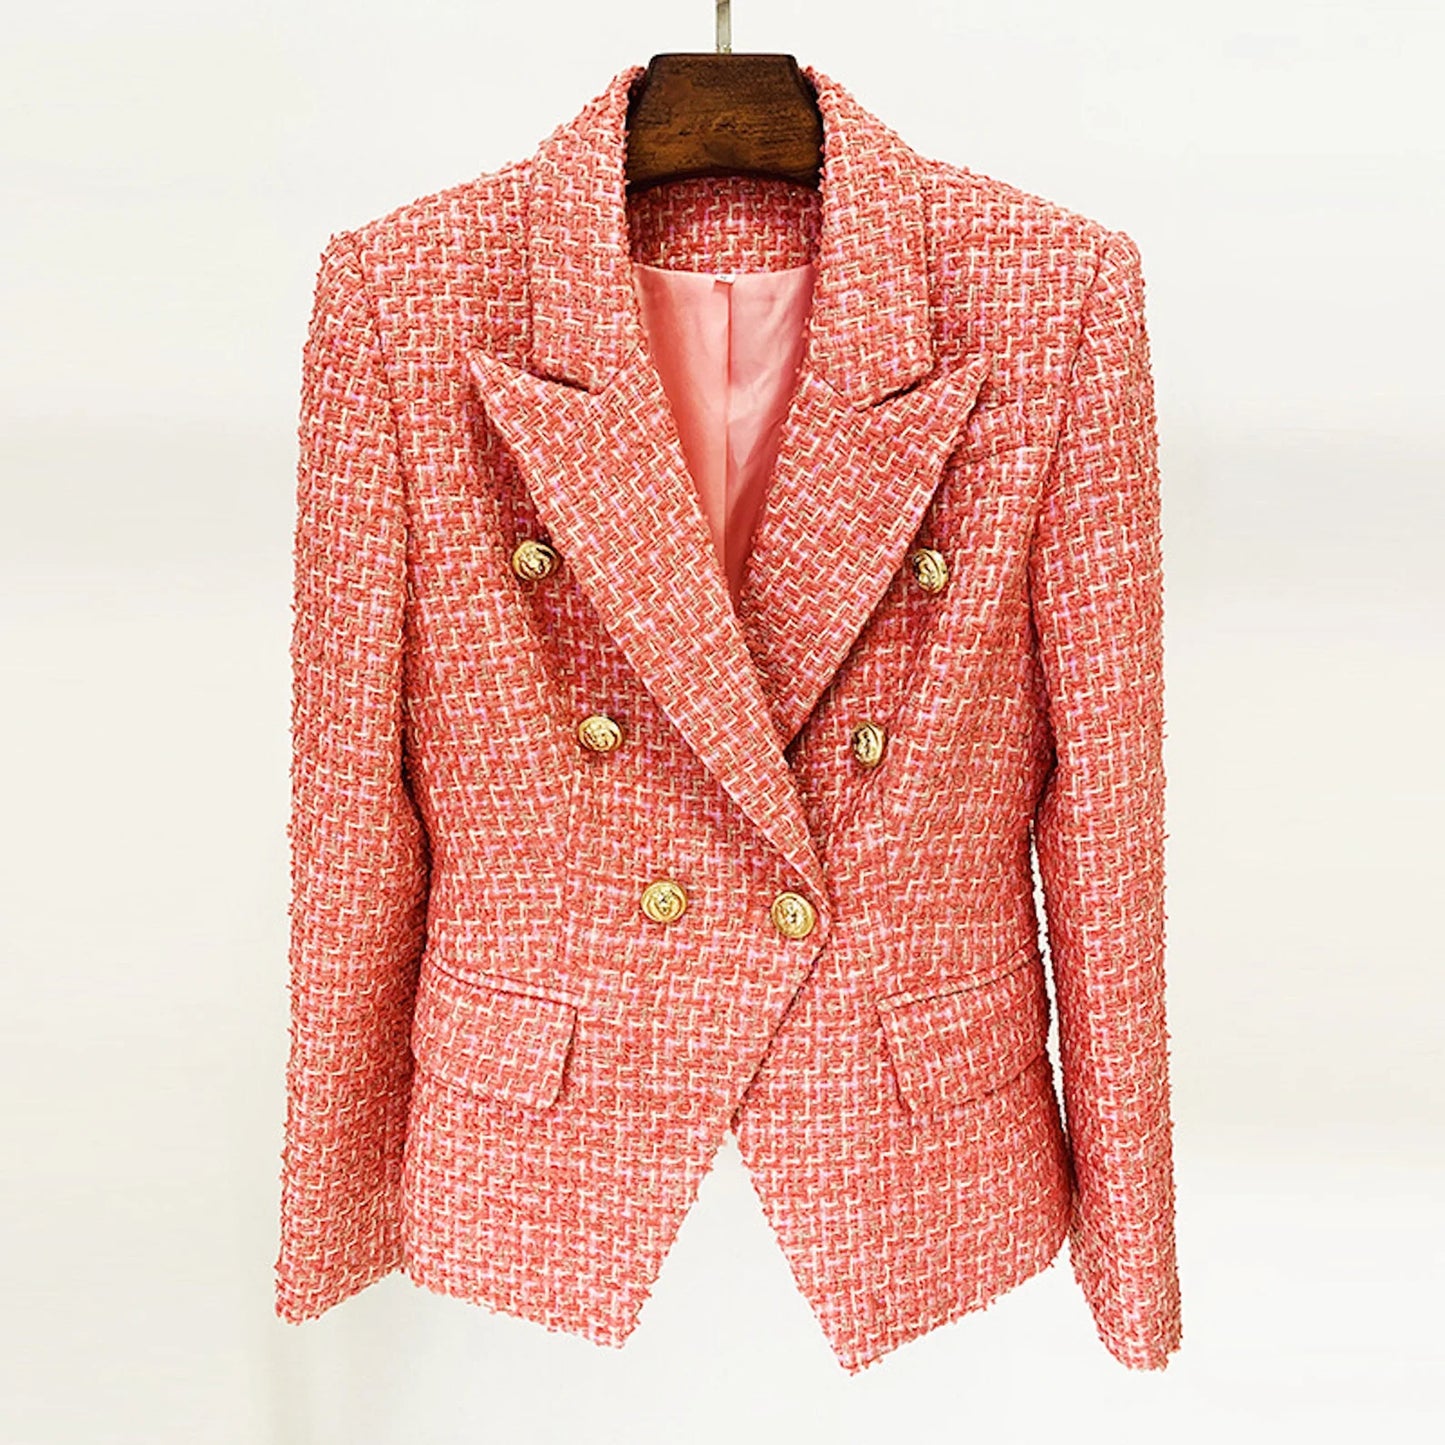 Peach Colour Luxury Women Golden Lion Buttons Tweed Jacket Blazer   Our fantastically flattering jacket is impeccably cut for the right fit and carefully designed for both shape and comfort. Our Fashionpioneer Jacket is eminently versatile, with an attractive peach colour that frames the face, pocket trims, and collar accents. 